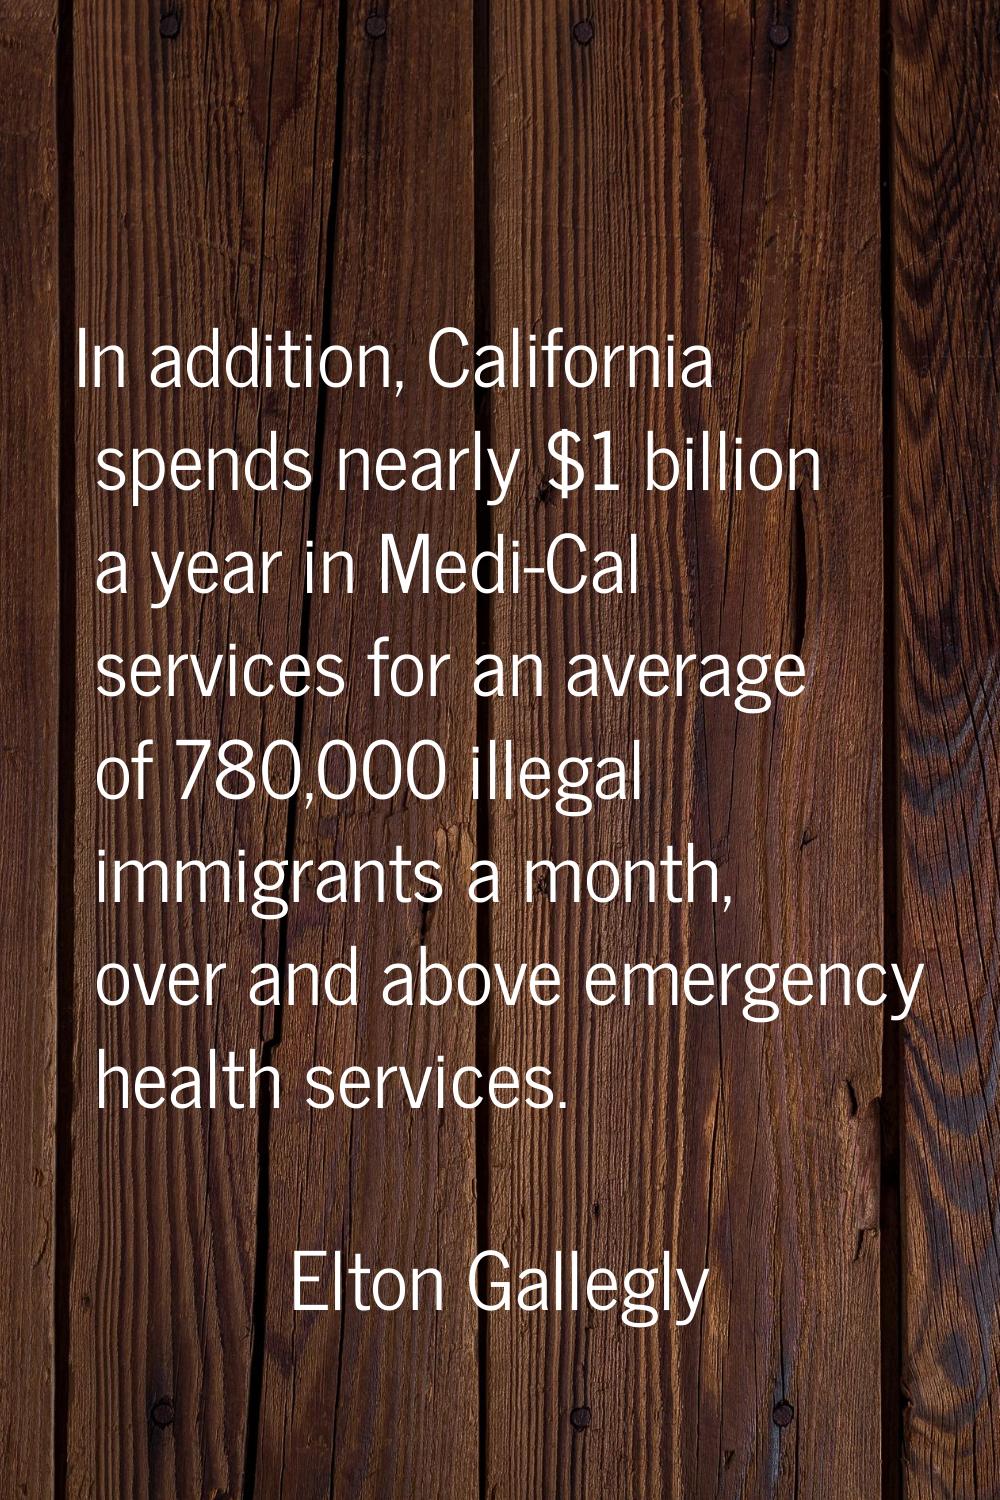 In addition, California spends nearly $1 billion a year in Medi-Cal services for an average of 780,